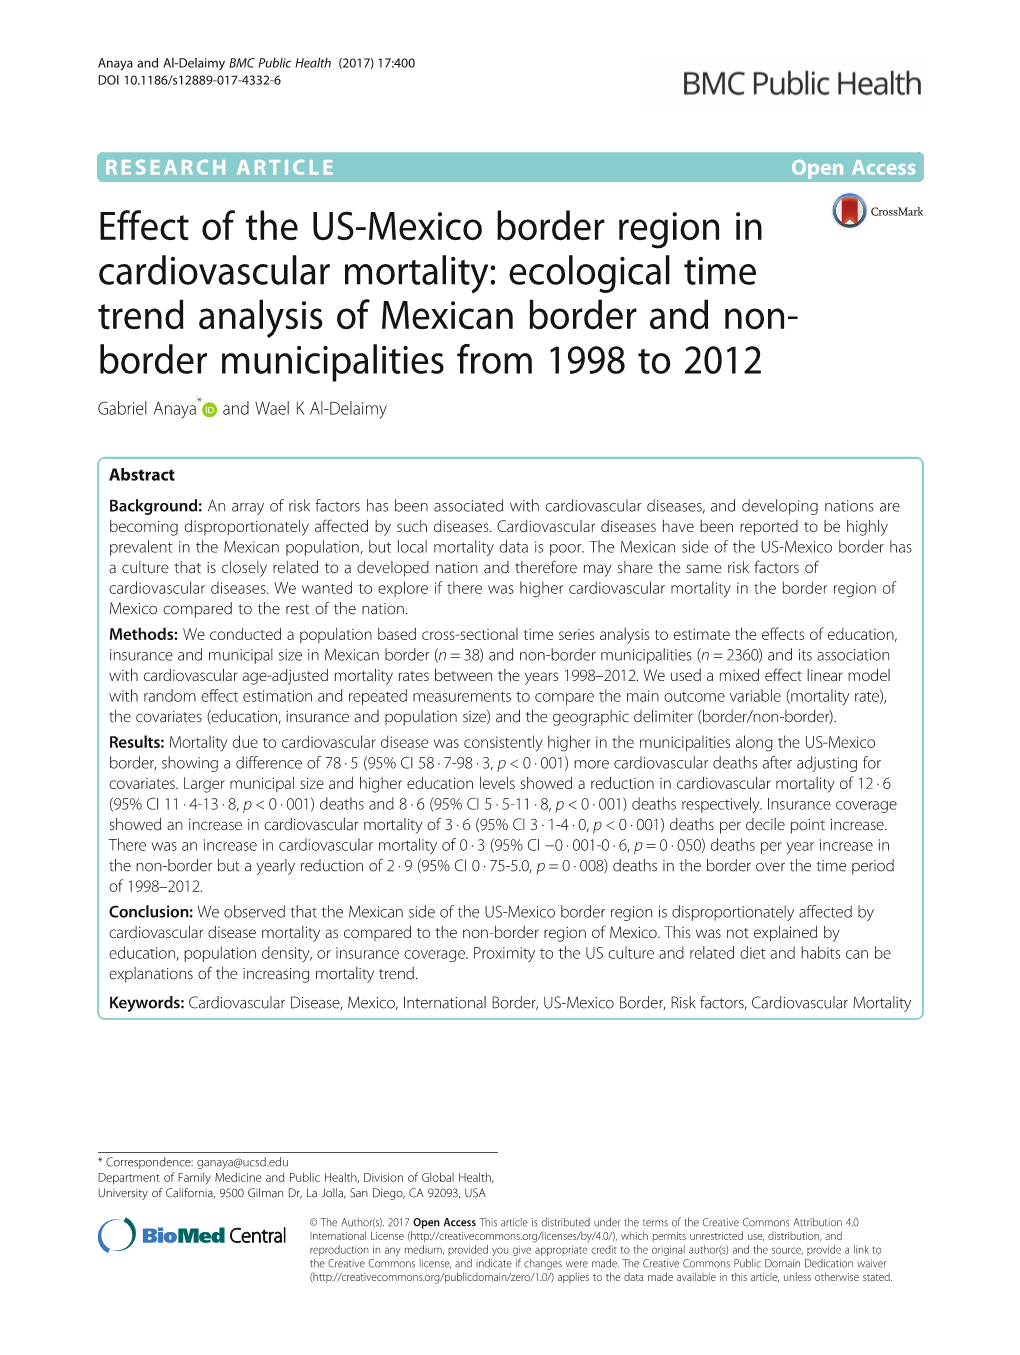 Downloaded from the Mexico’Sgeneral and Risks in Both Sides of the Border [6], but Population Directorate on Health Information (DGIS) [12]